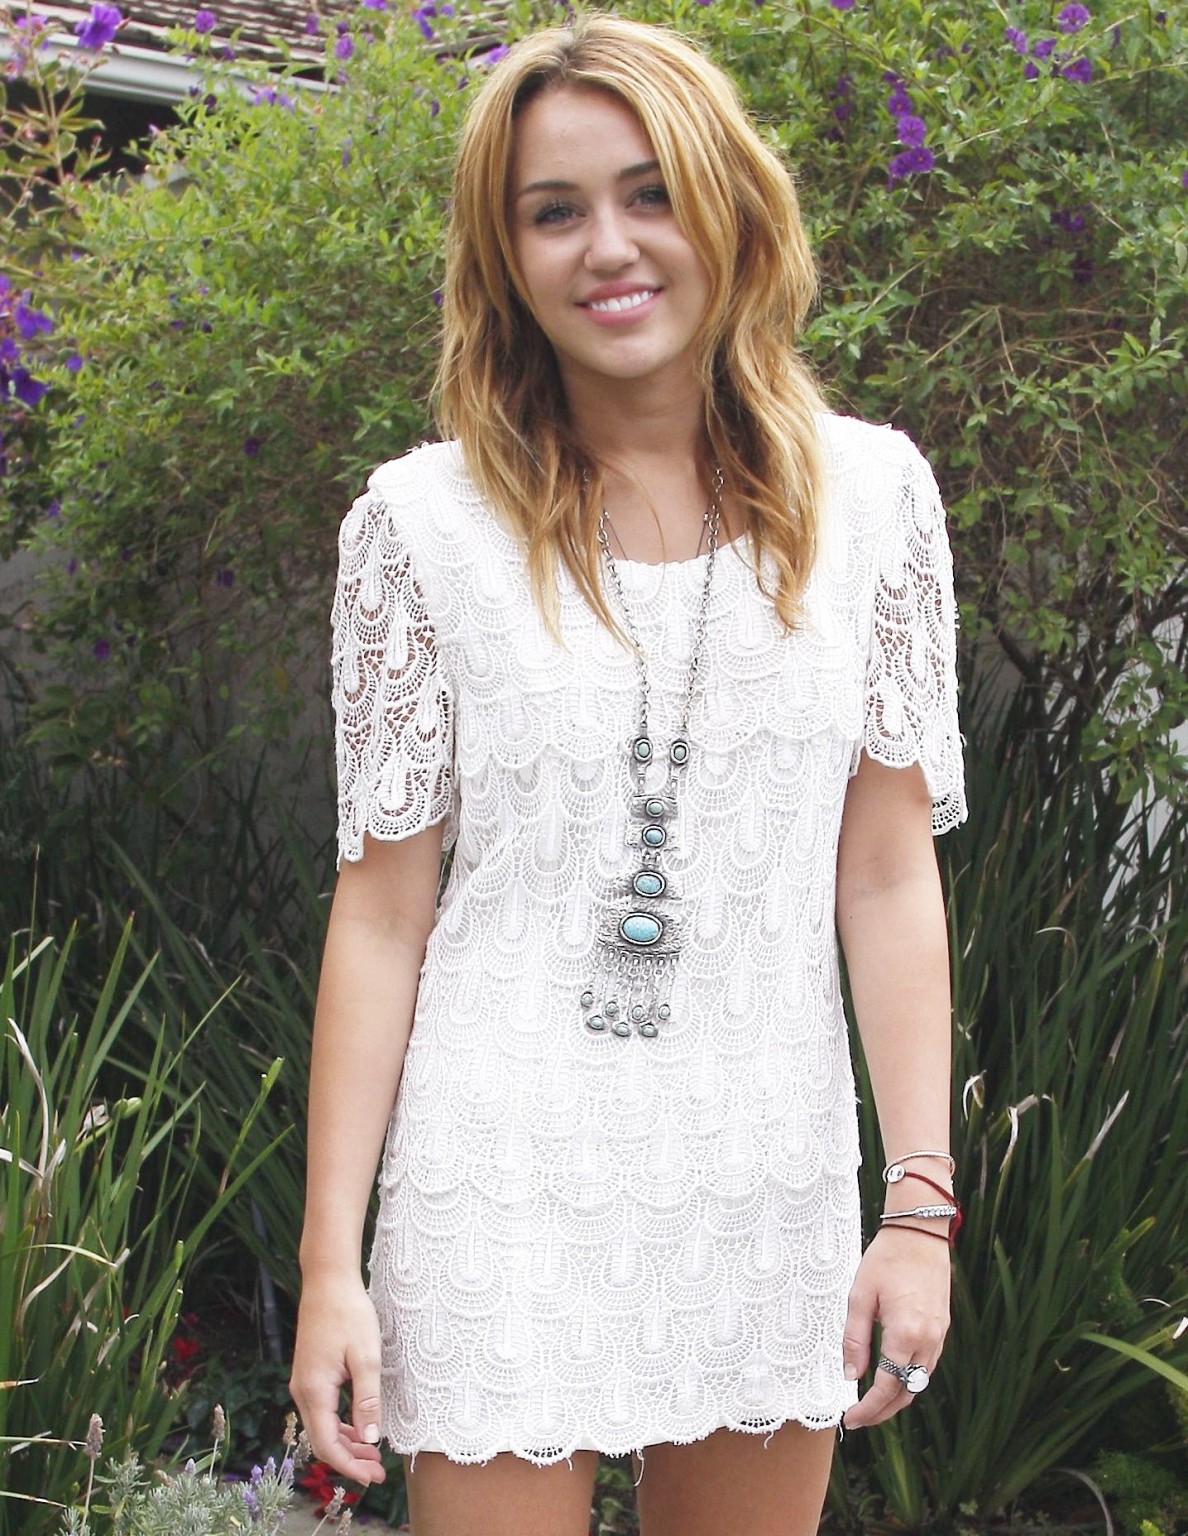 Miley Cyrus leggy wearing white mini dress at the house party #75289917